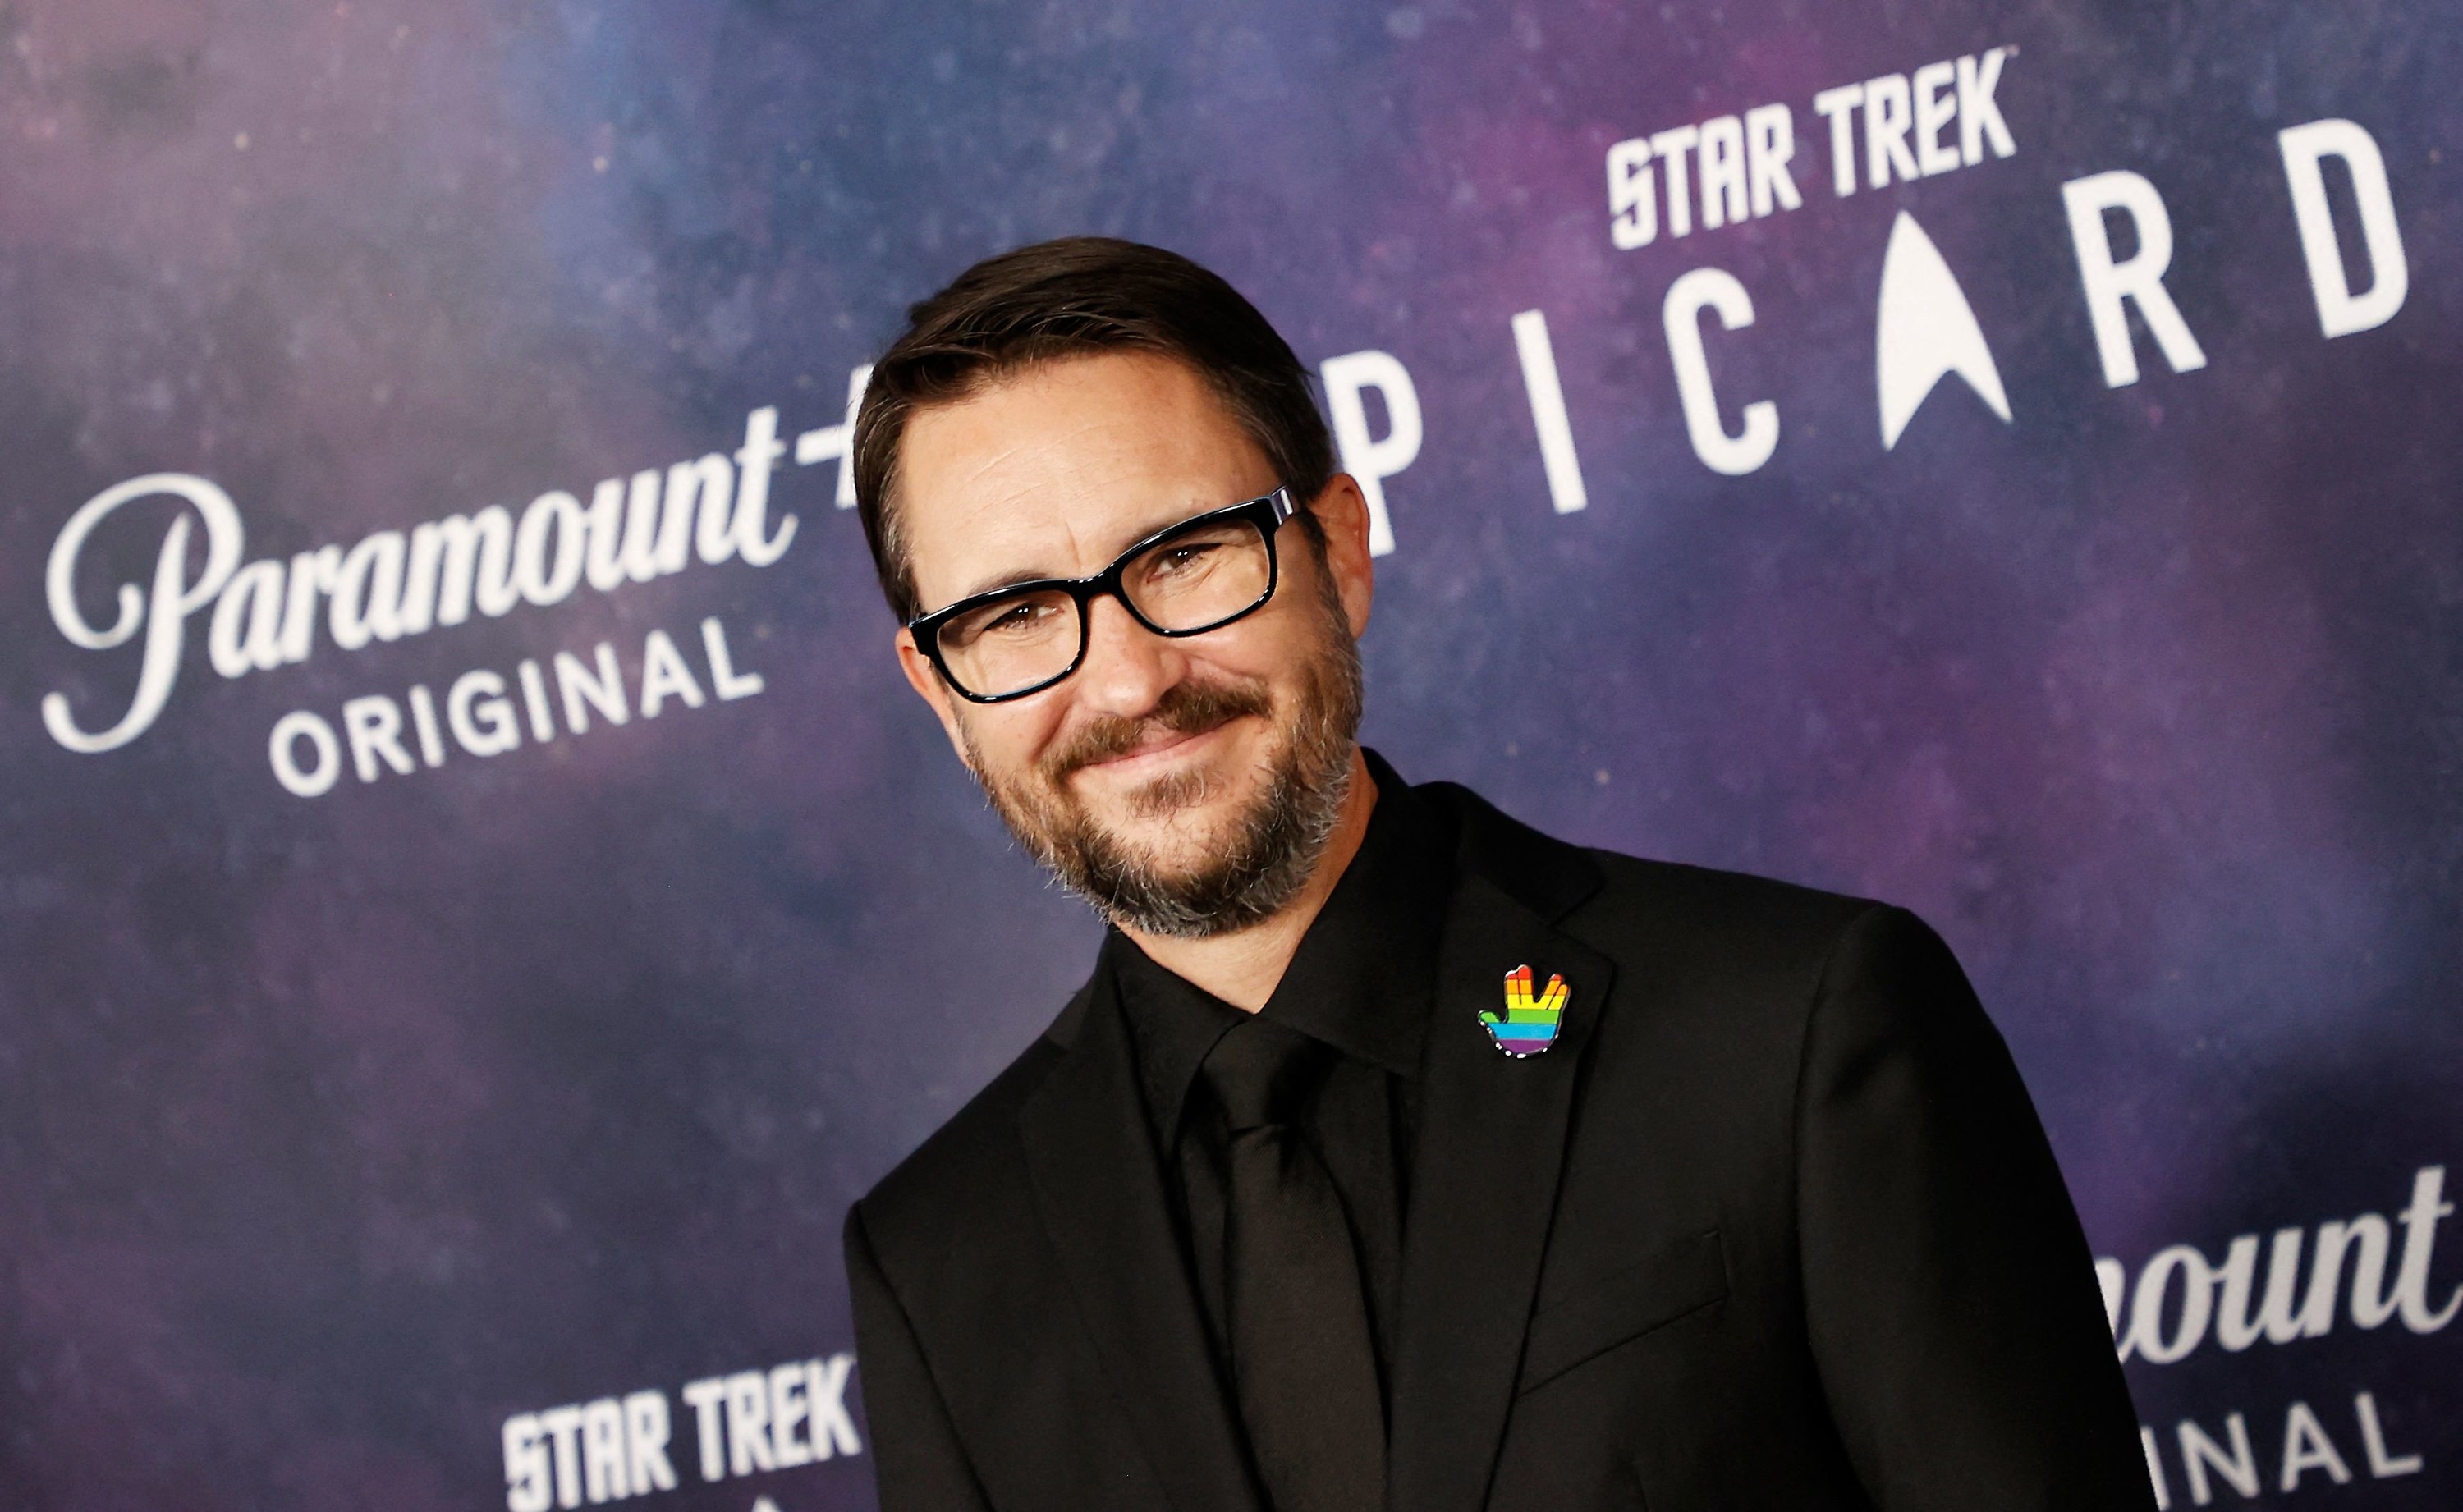 Head and shoulders shot of Wil Wheaton wearing a black suit with an LGBTQ+ Star Trek badge on its lapel